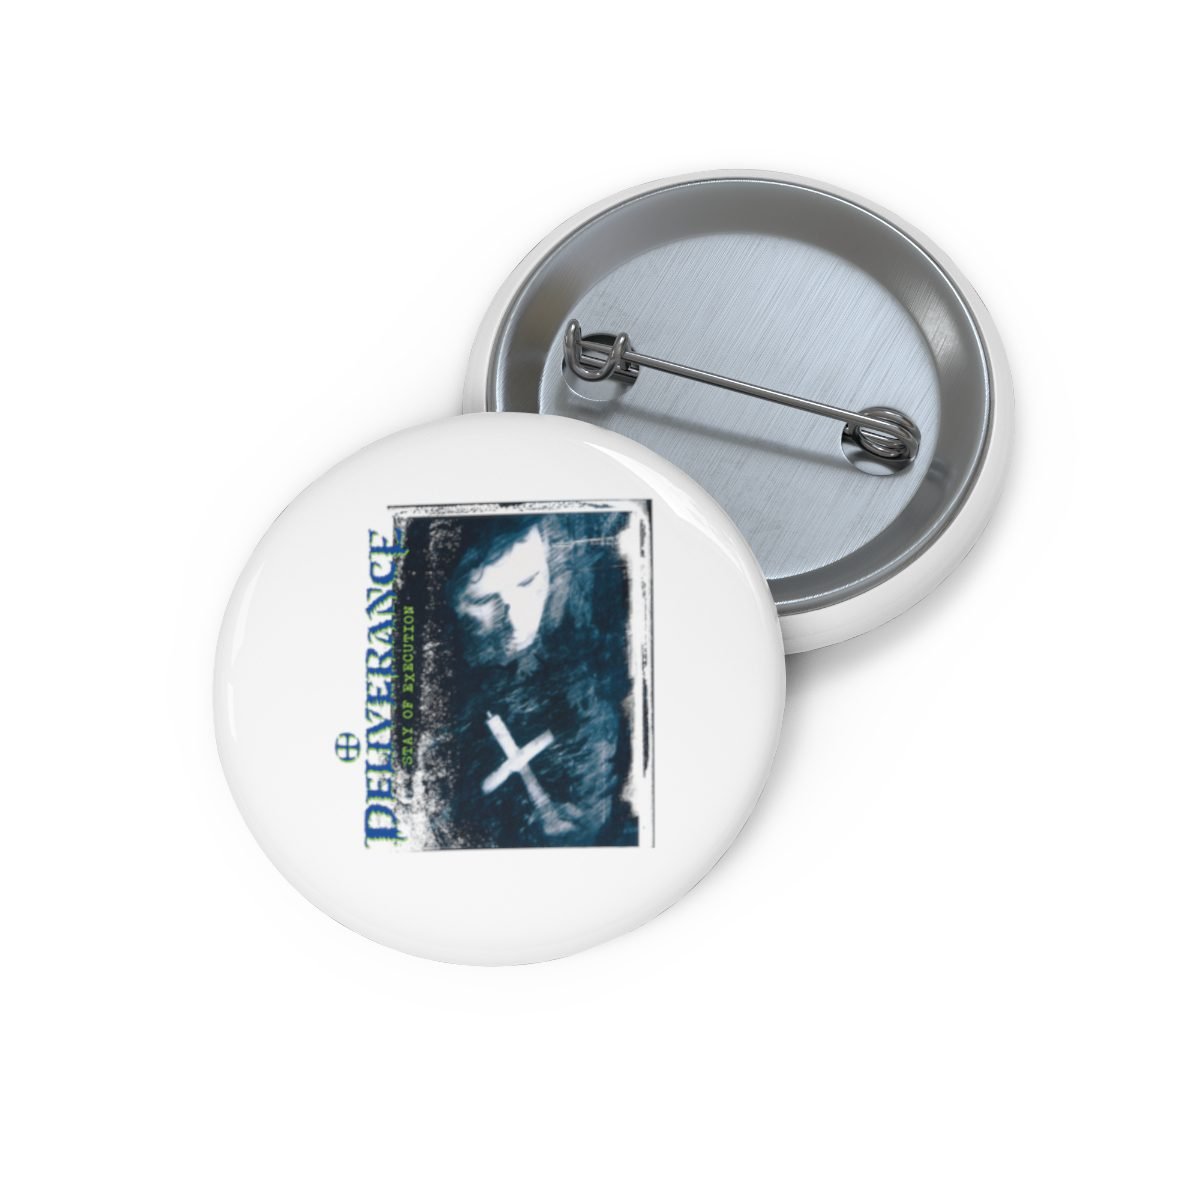 Deliverance – Stay of Execution (Light) Pin Buttons